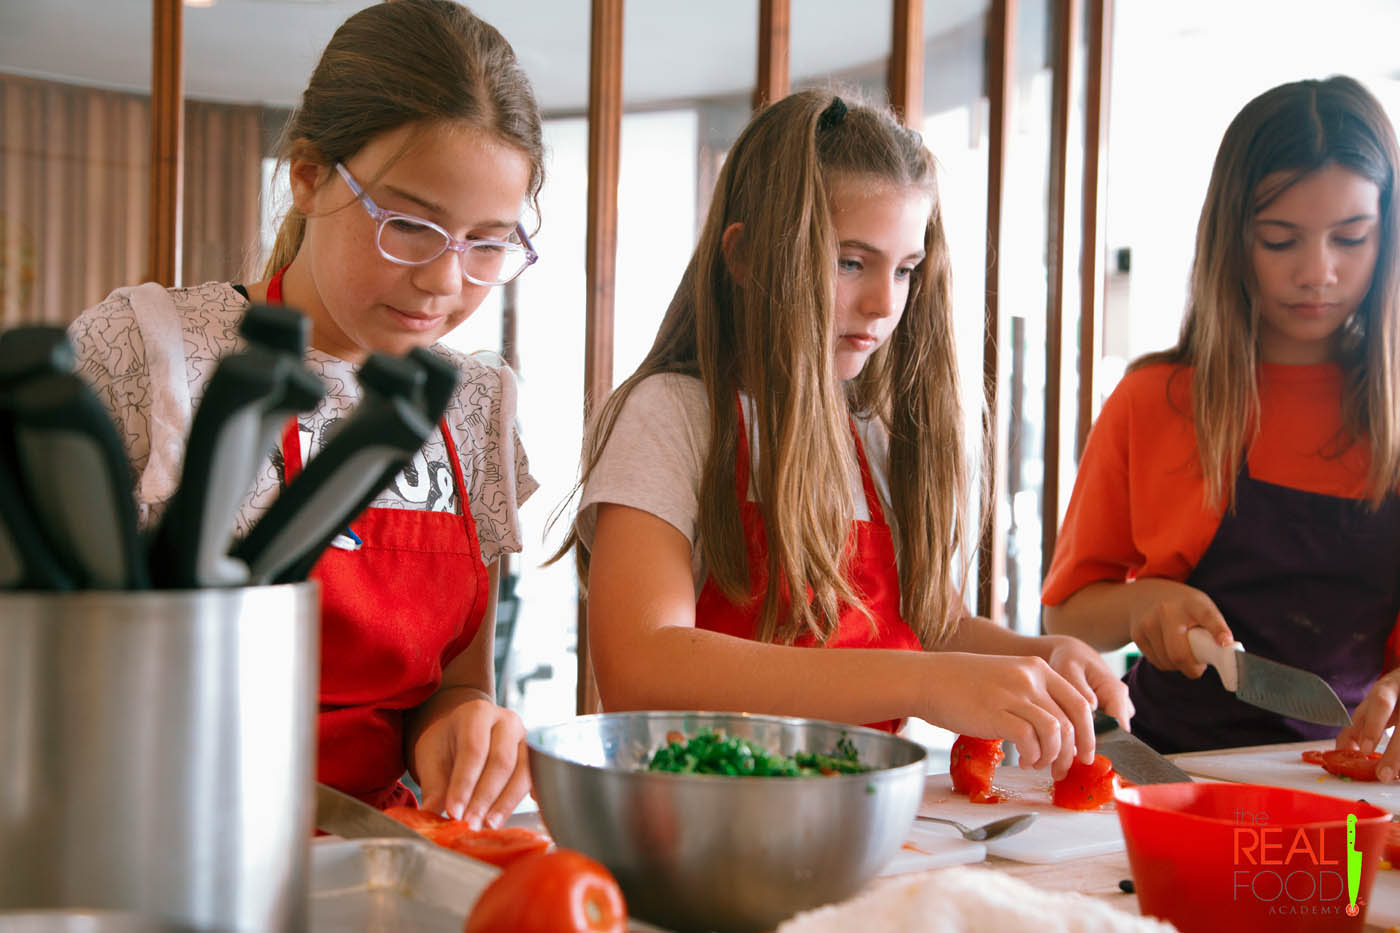 The Real Food Academy Miami - Top Cooking Classes for Teens in Miami, FL. Real Food Academy